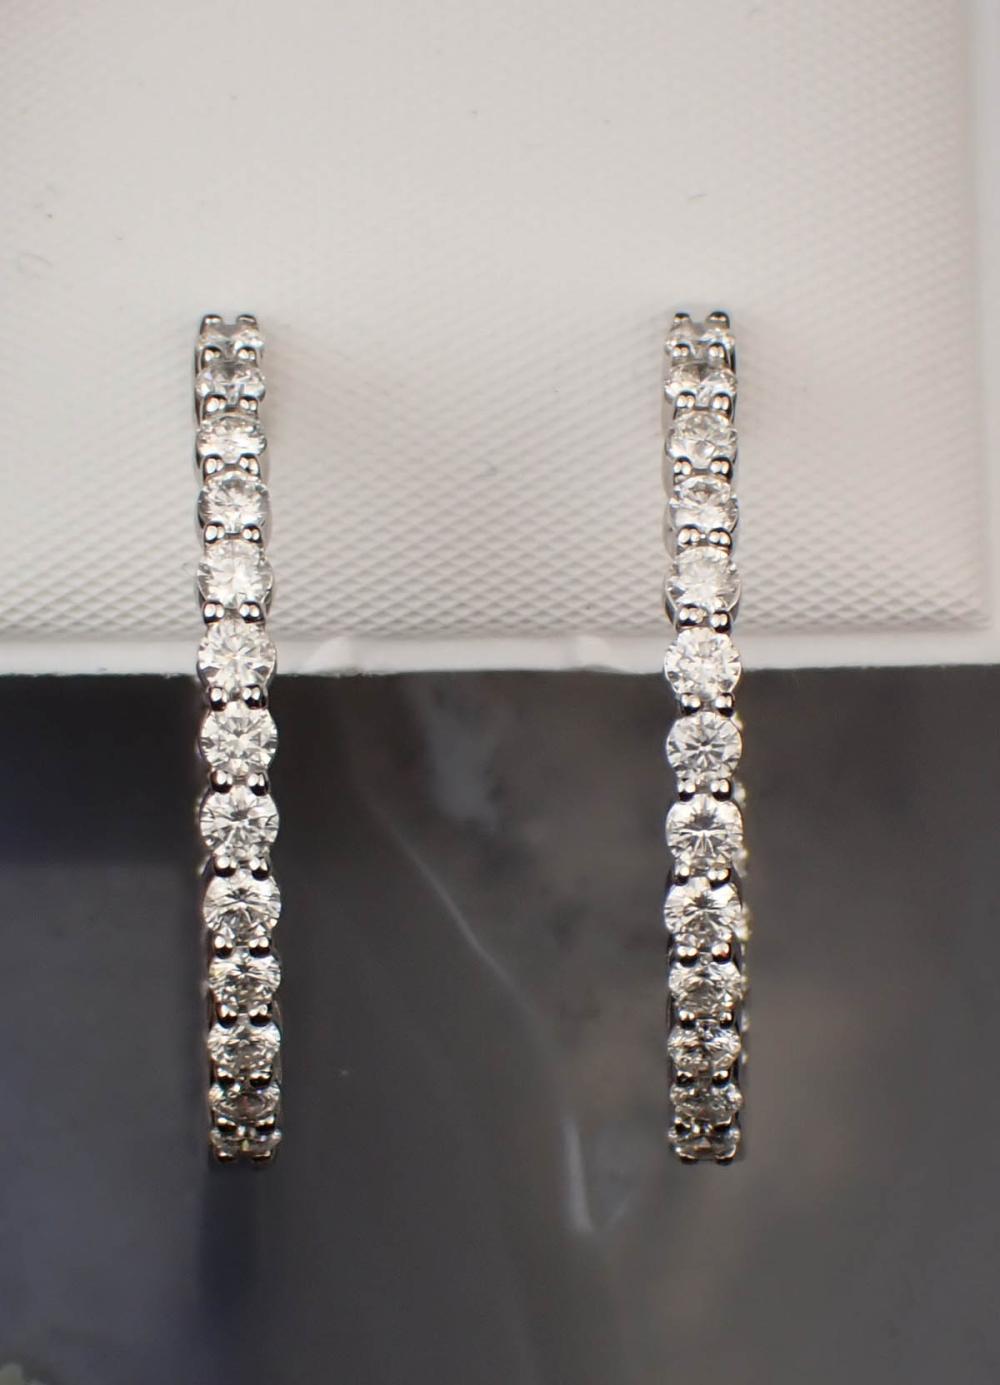 PAIR OF DIAMOND AND WHITE GOLD 2ed5ad